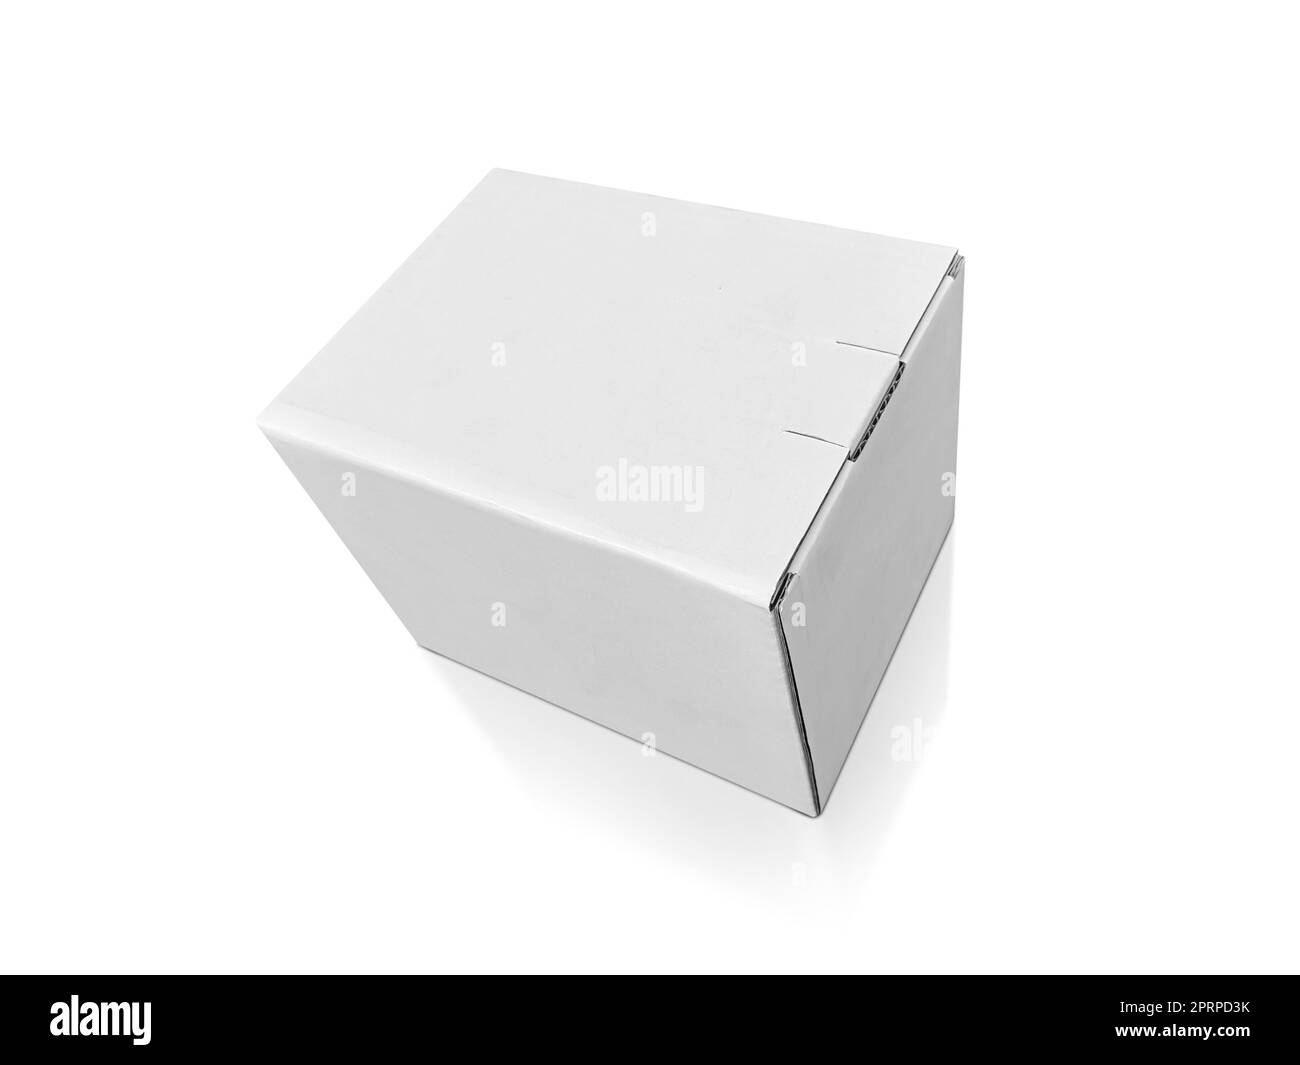 blank packaging white cardboard box isolated on white background ready ...